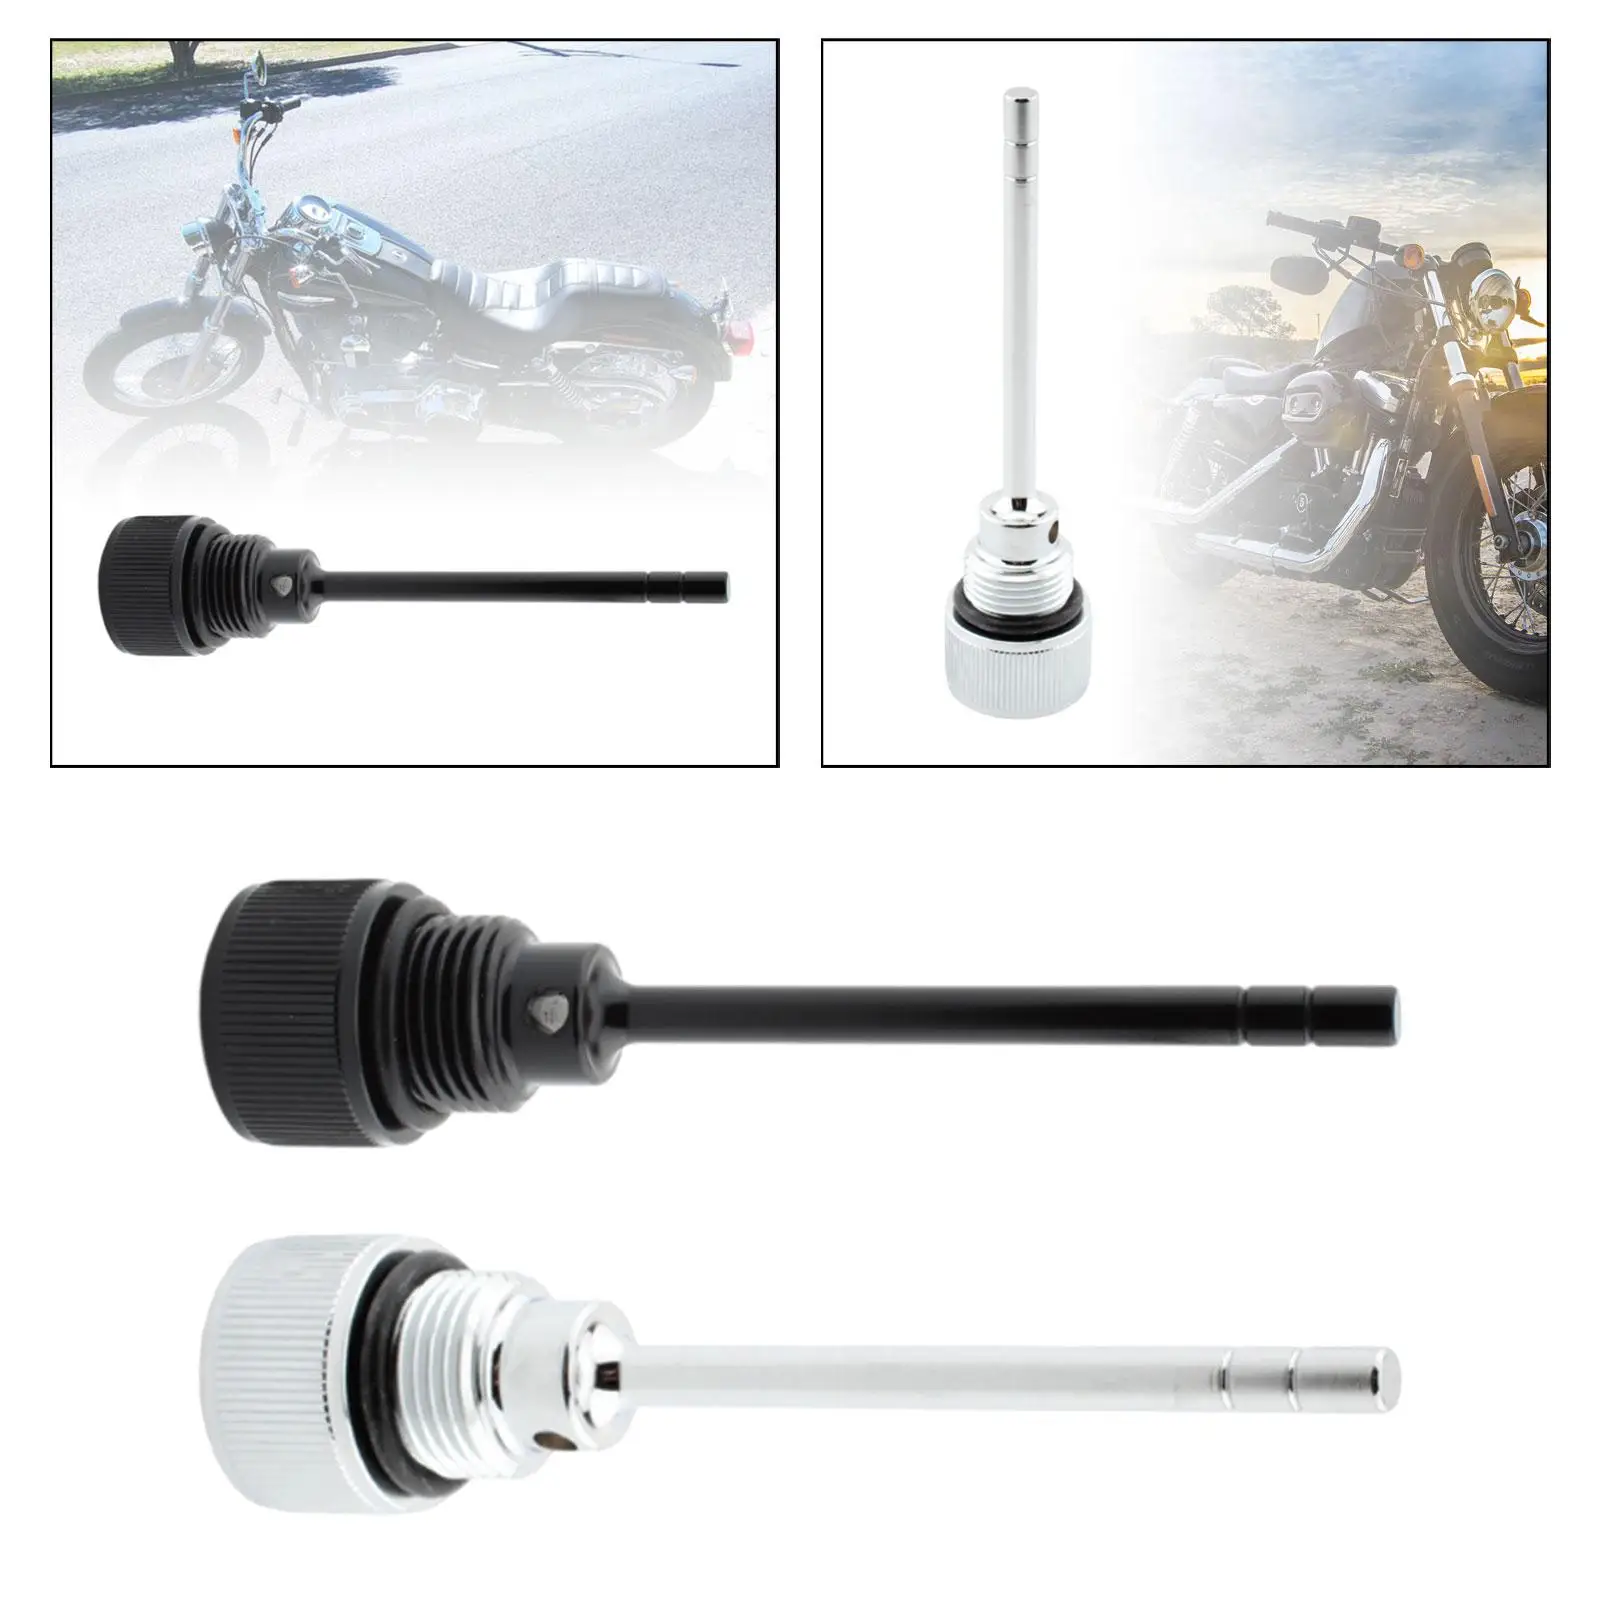 Transmission Oil Fill Plug Dipstick Easy Installation Repair Parts Accessories for Fxs Breakout Fxbr Classic Efi Flhtci